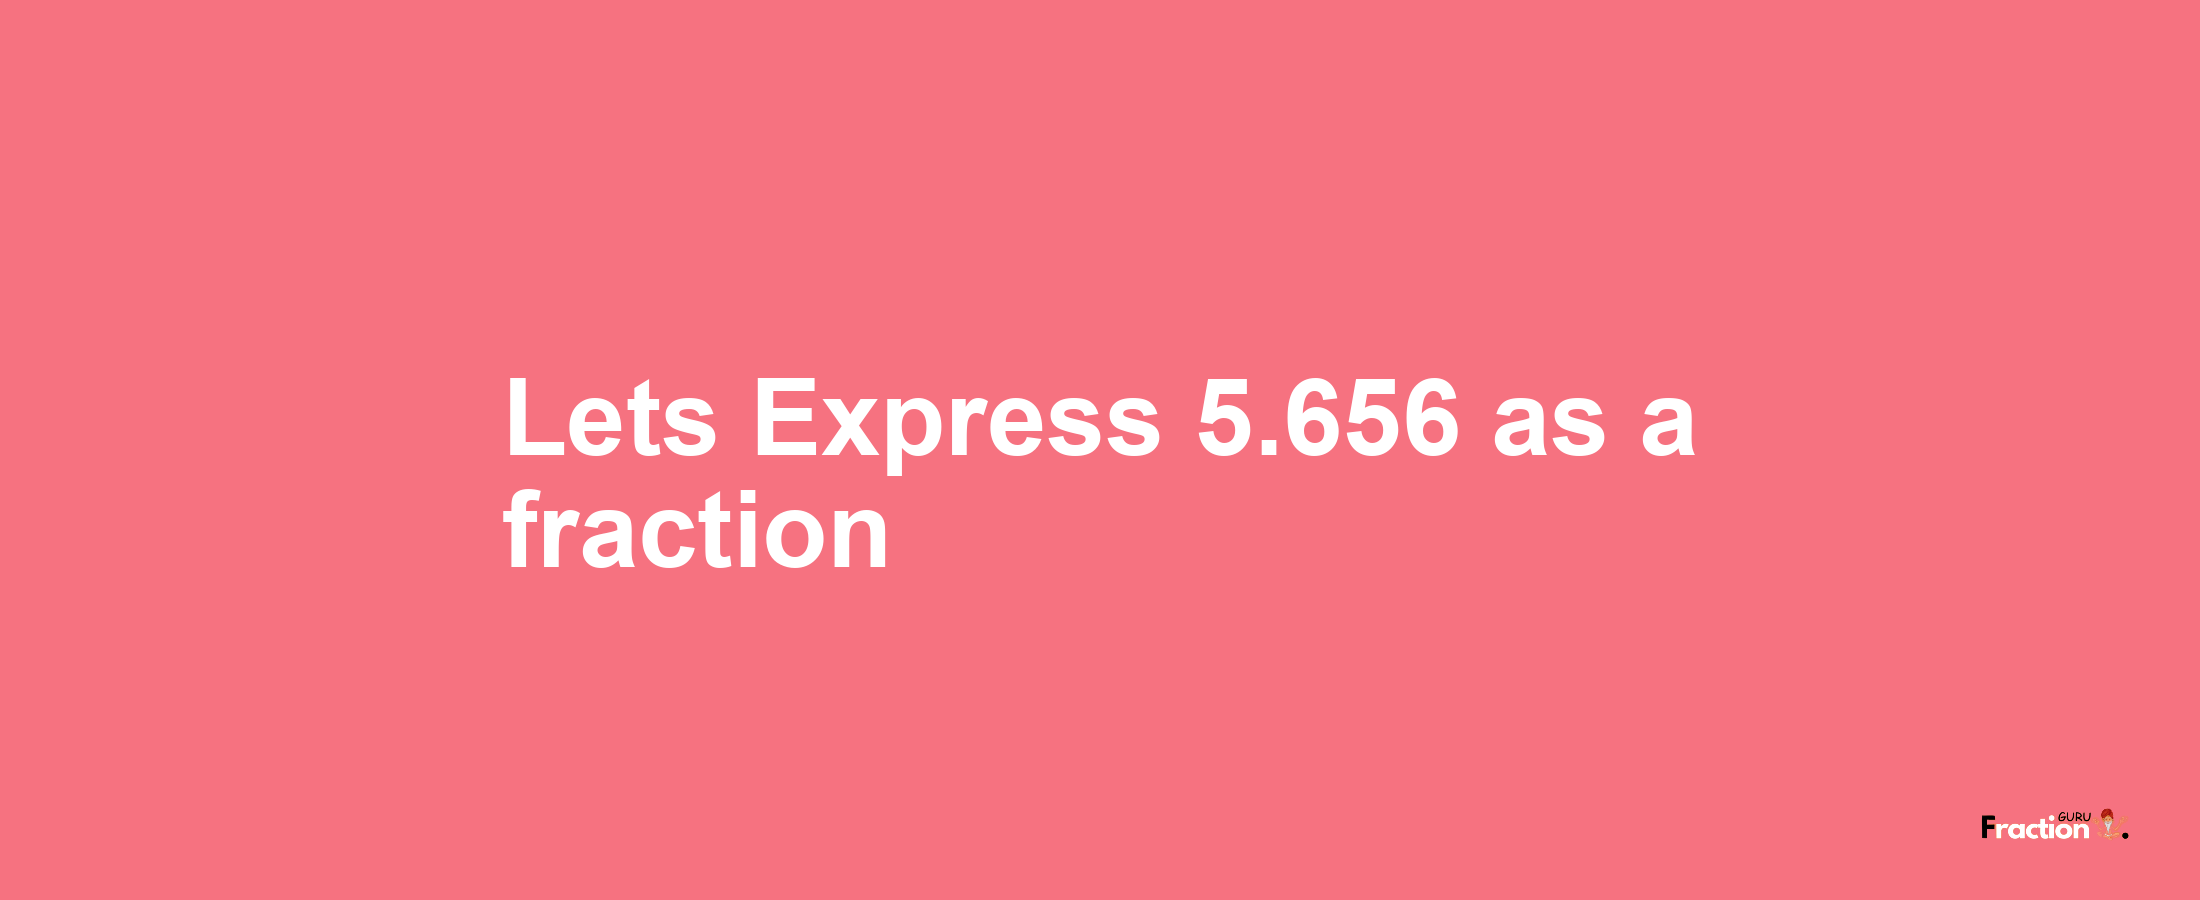 Lets Express 5.656 as afraction